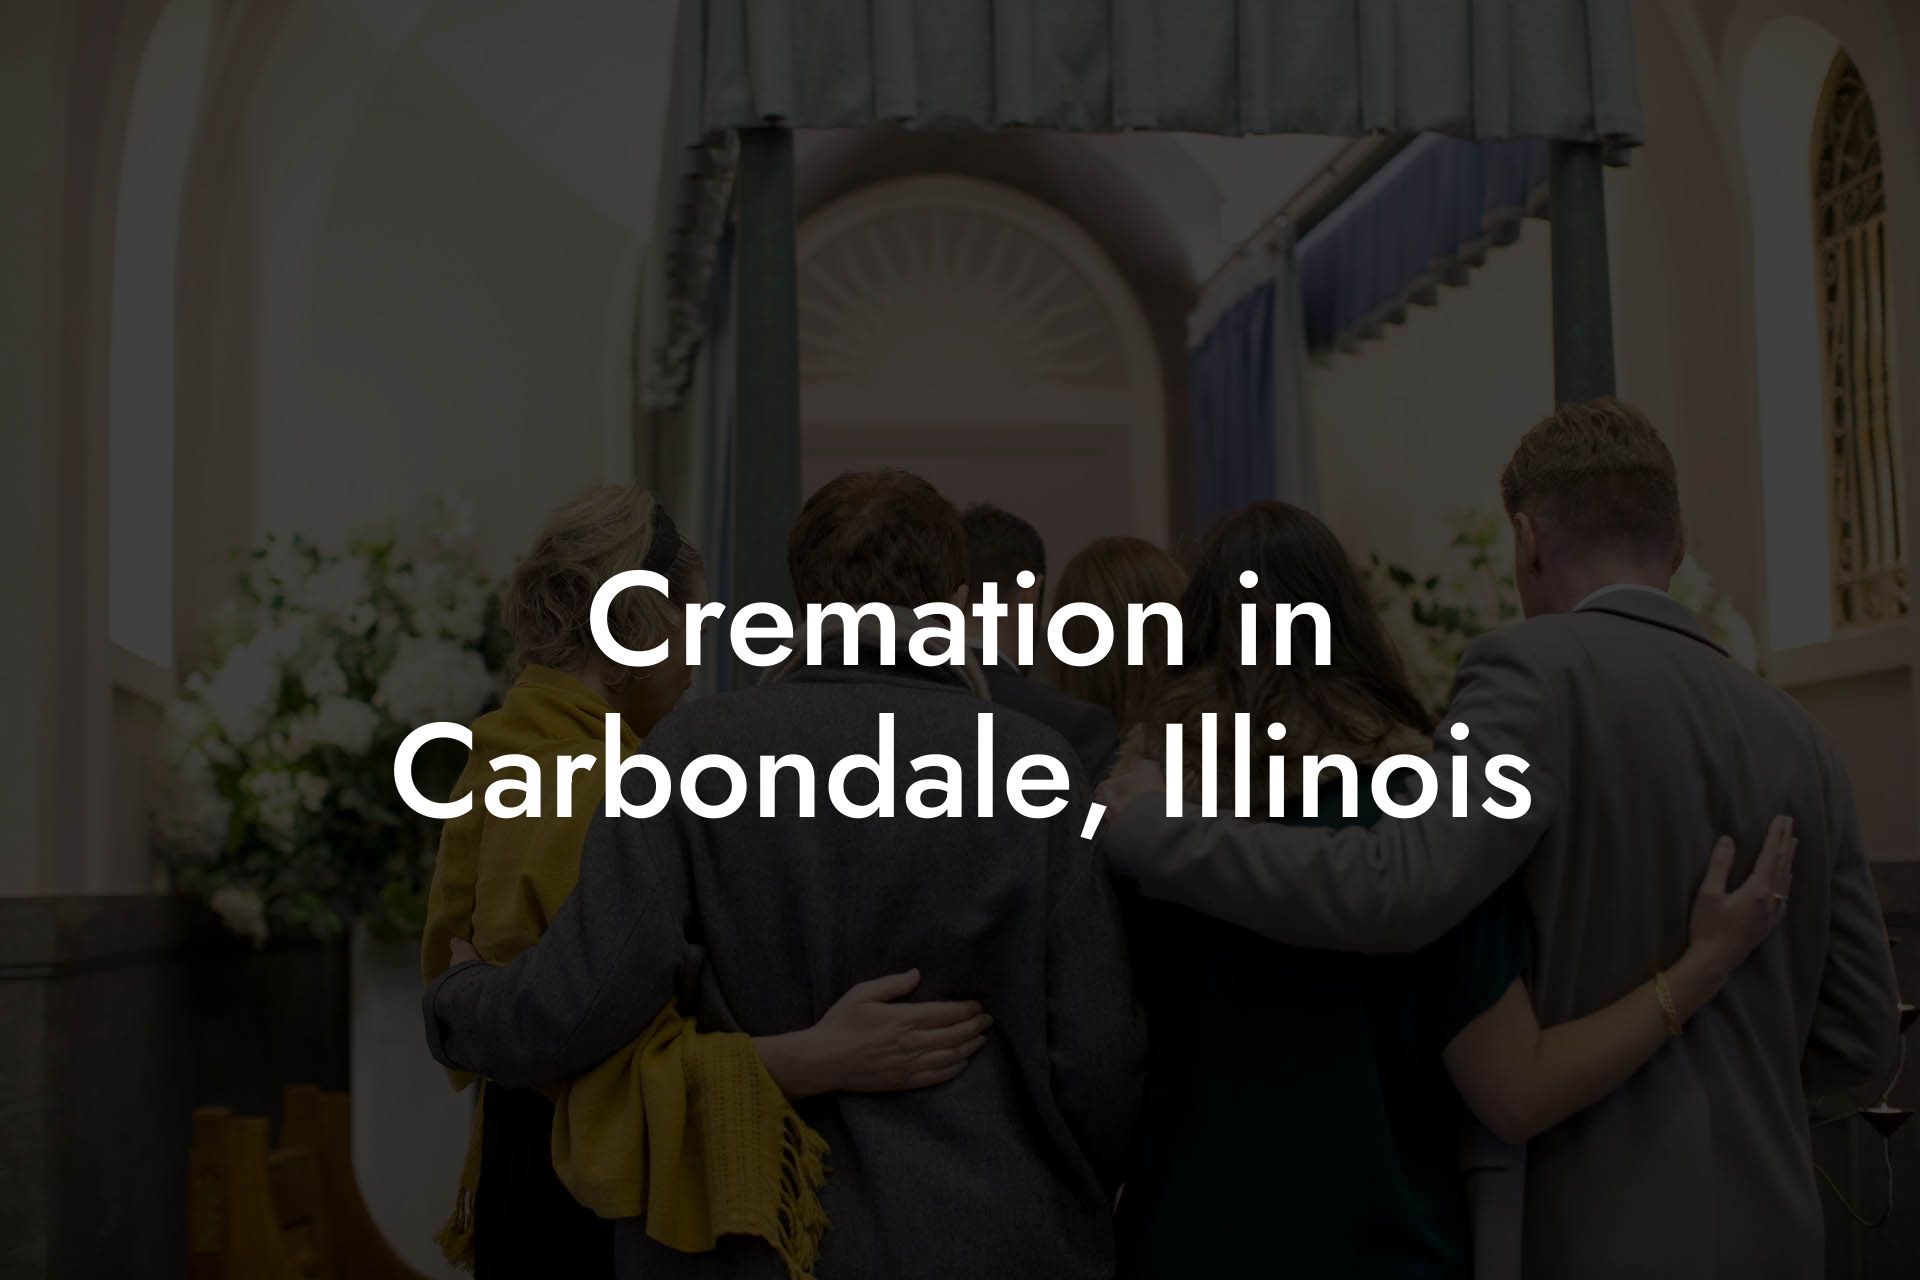 Cremation in Carbondale, Illinois